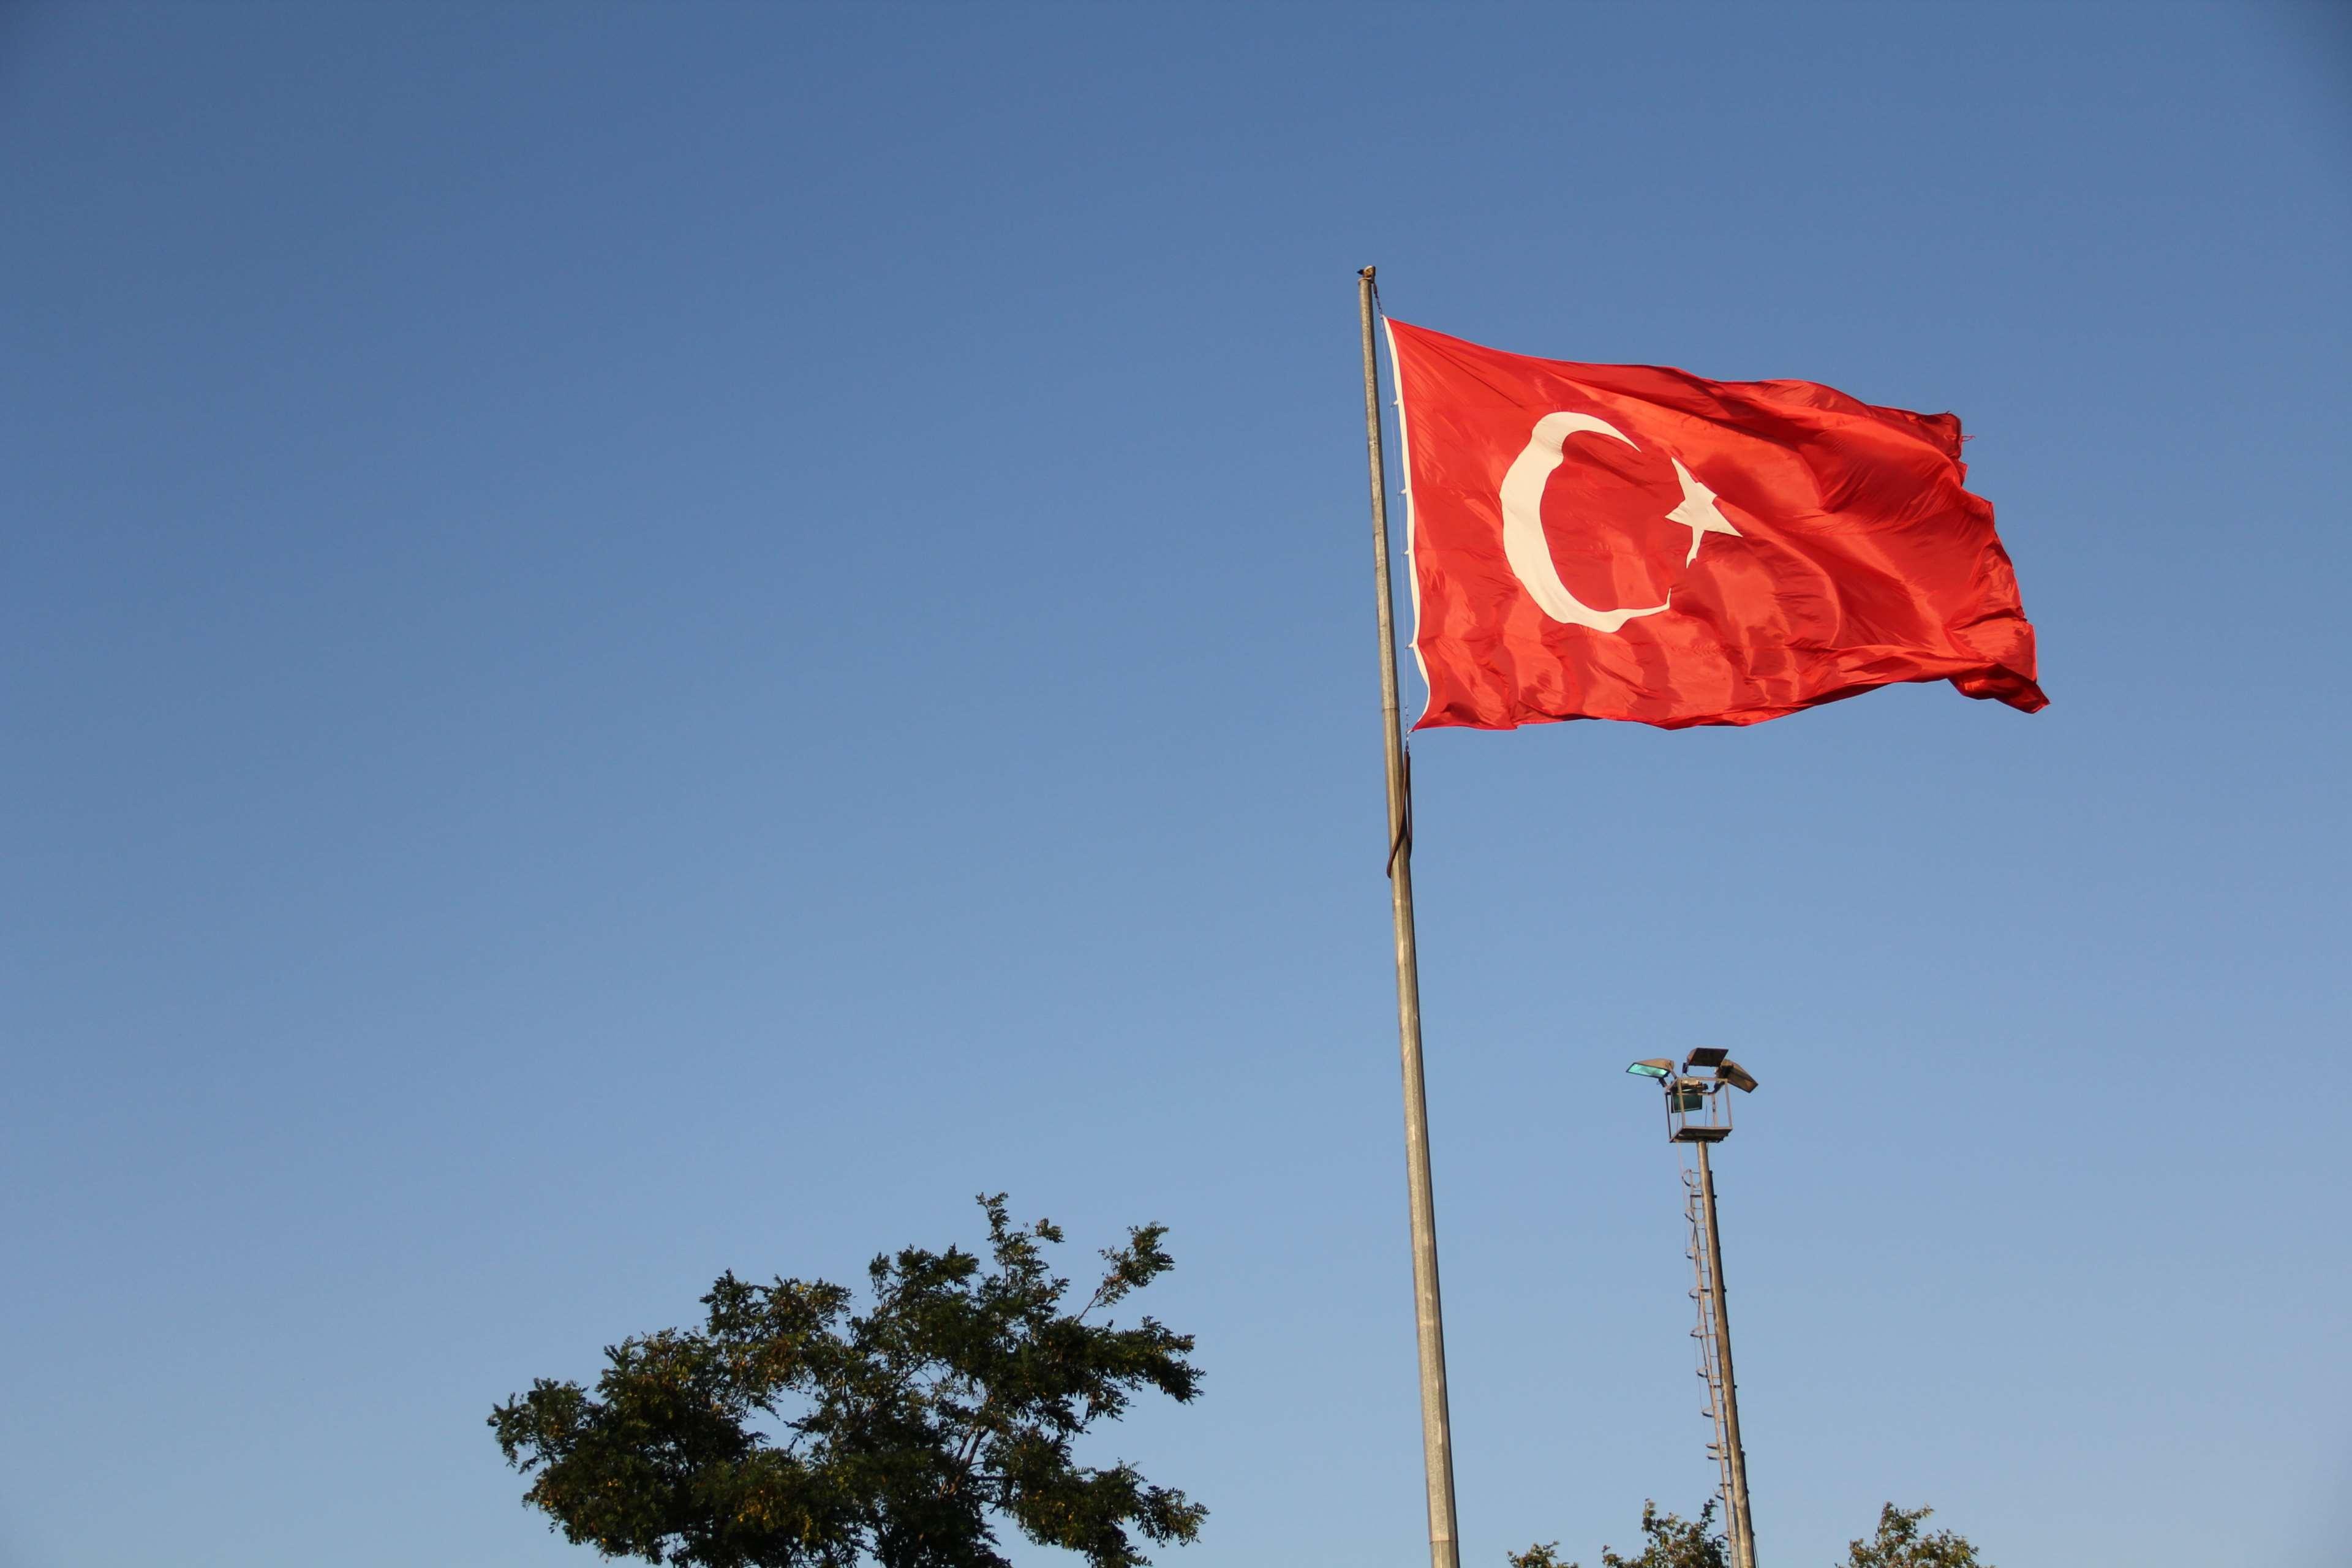 Turkish Flag Wallpaper, image collections of wallpaper